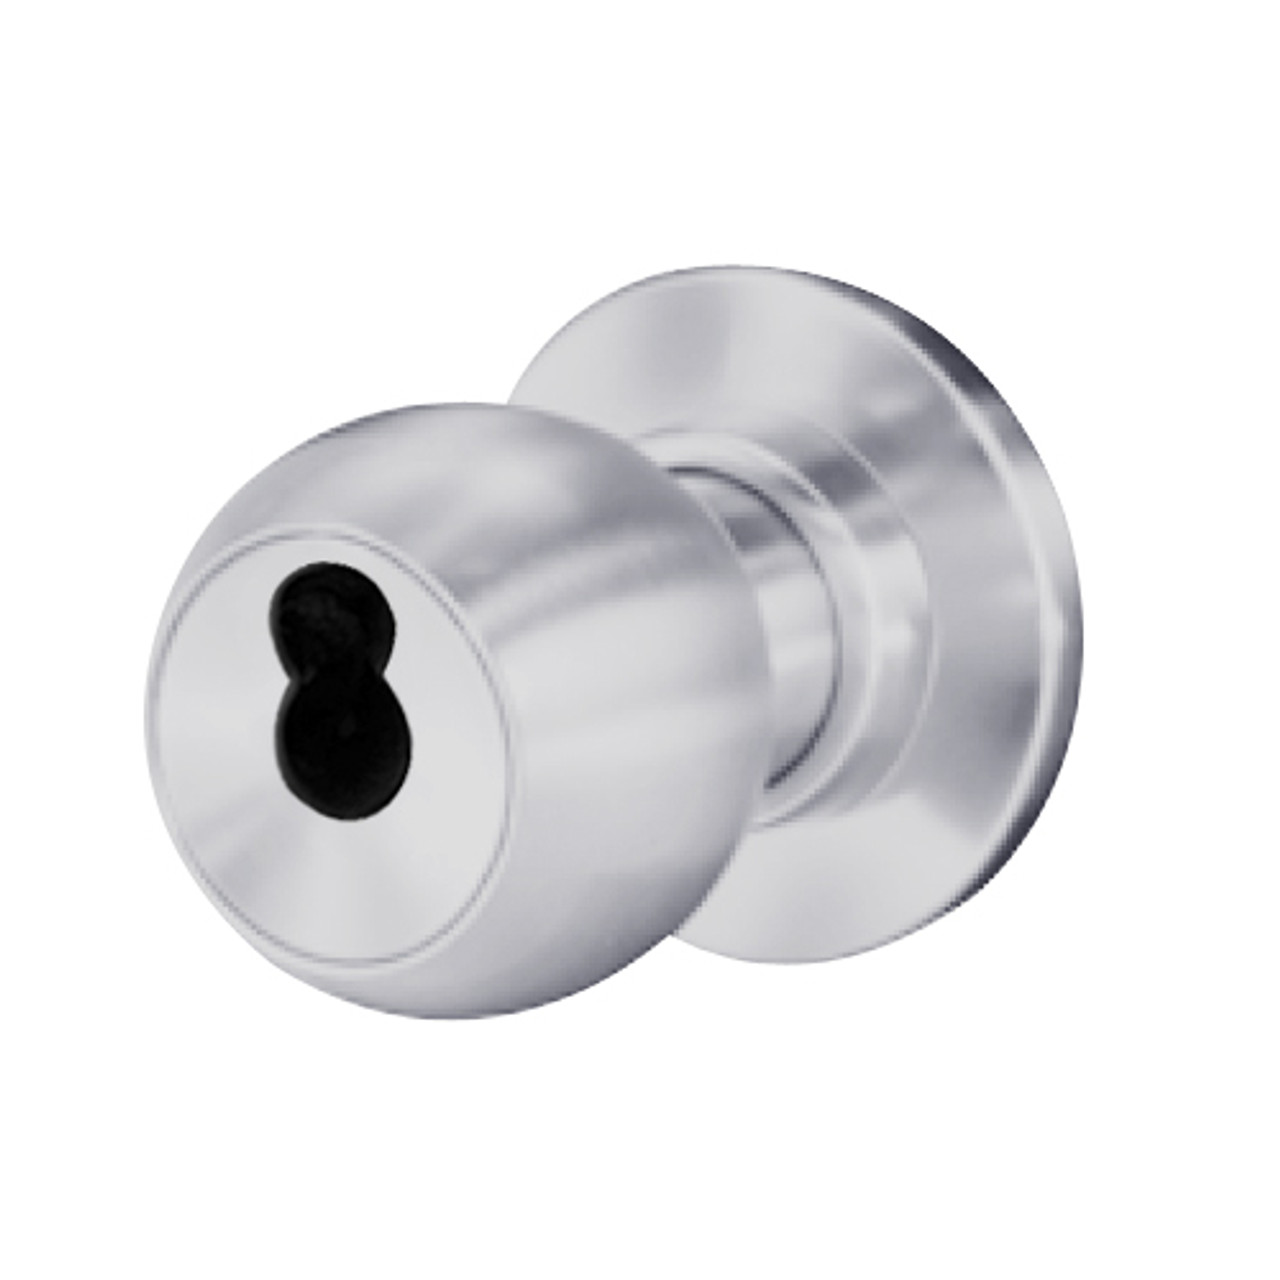 8K47XR4CS3626 Best 8K Series Special Heavy Duty Cylindrical Knob Locks with Round Style in Satin Chrome